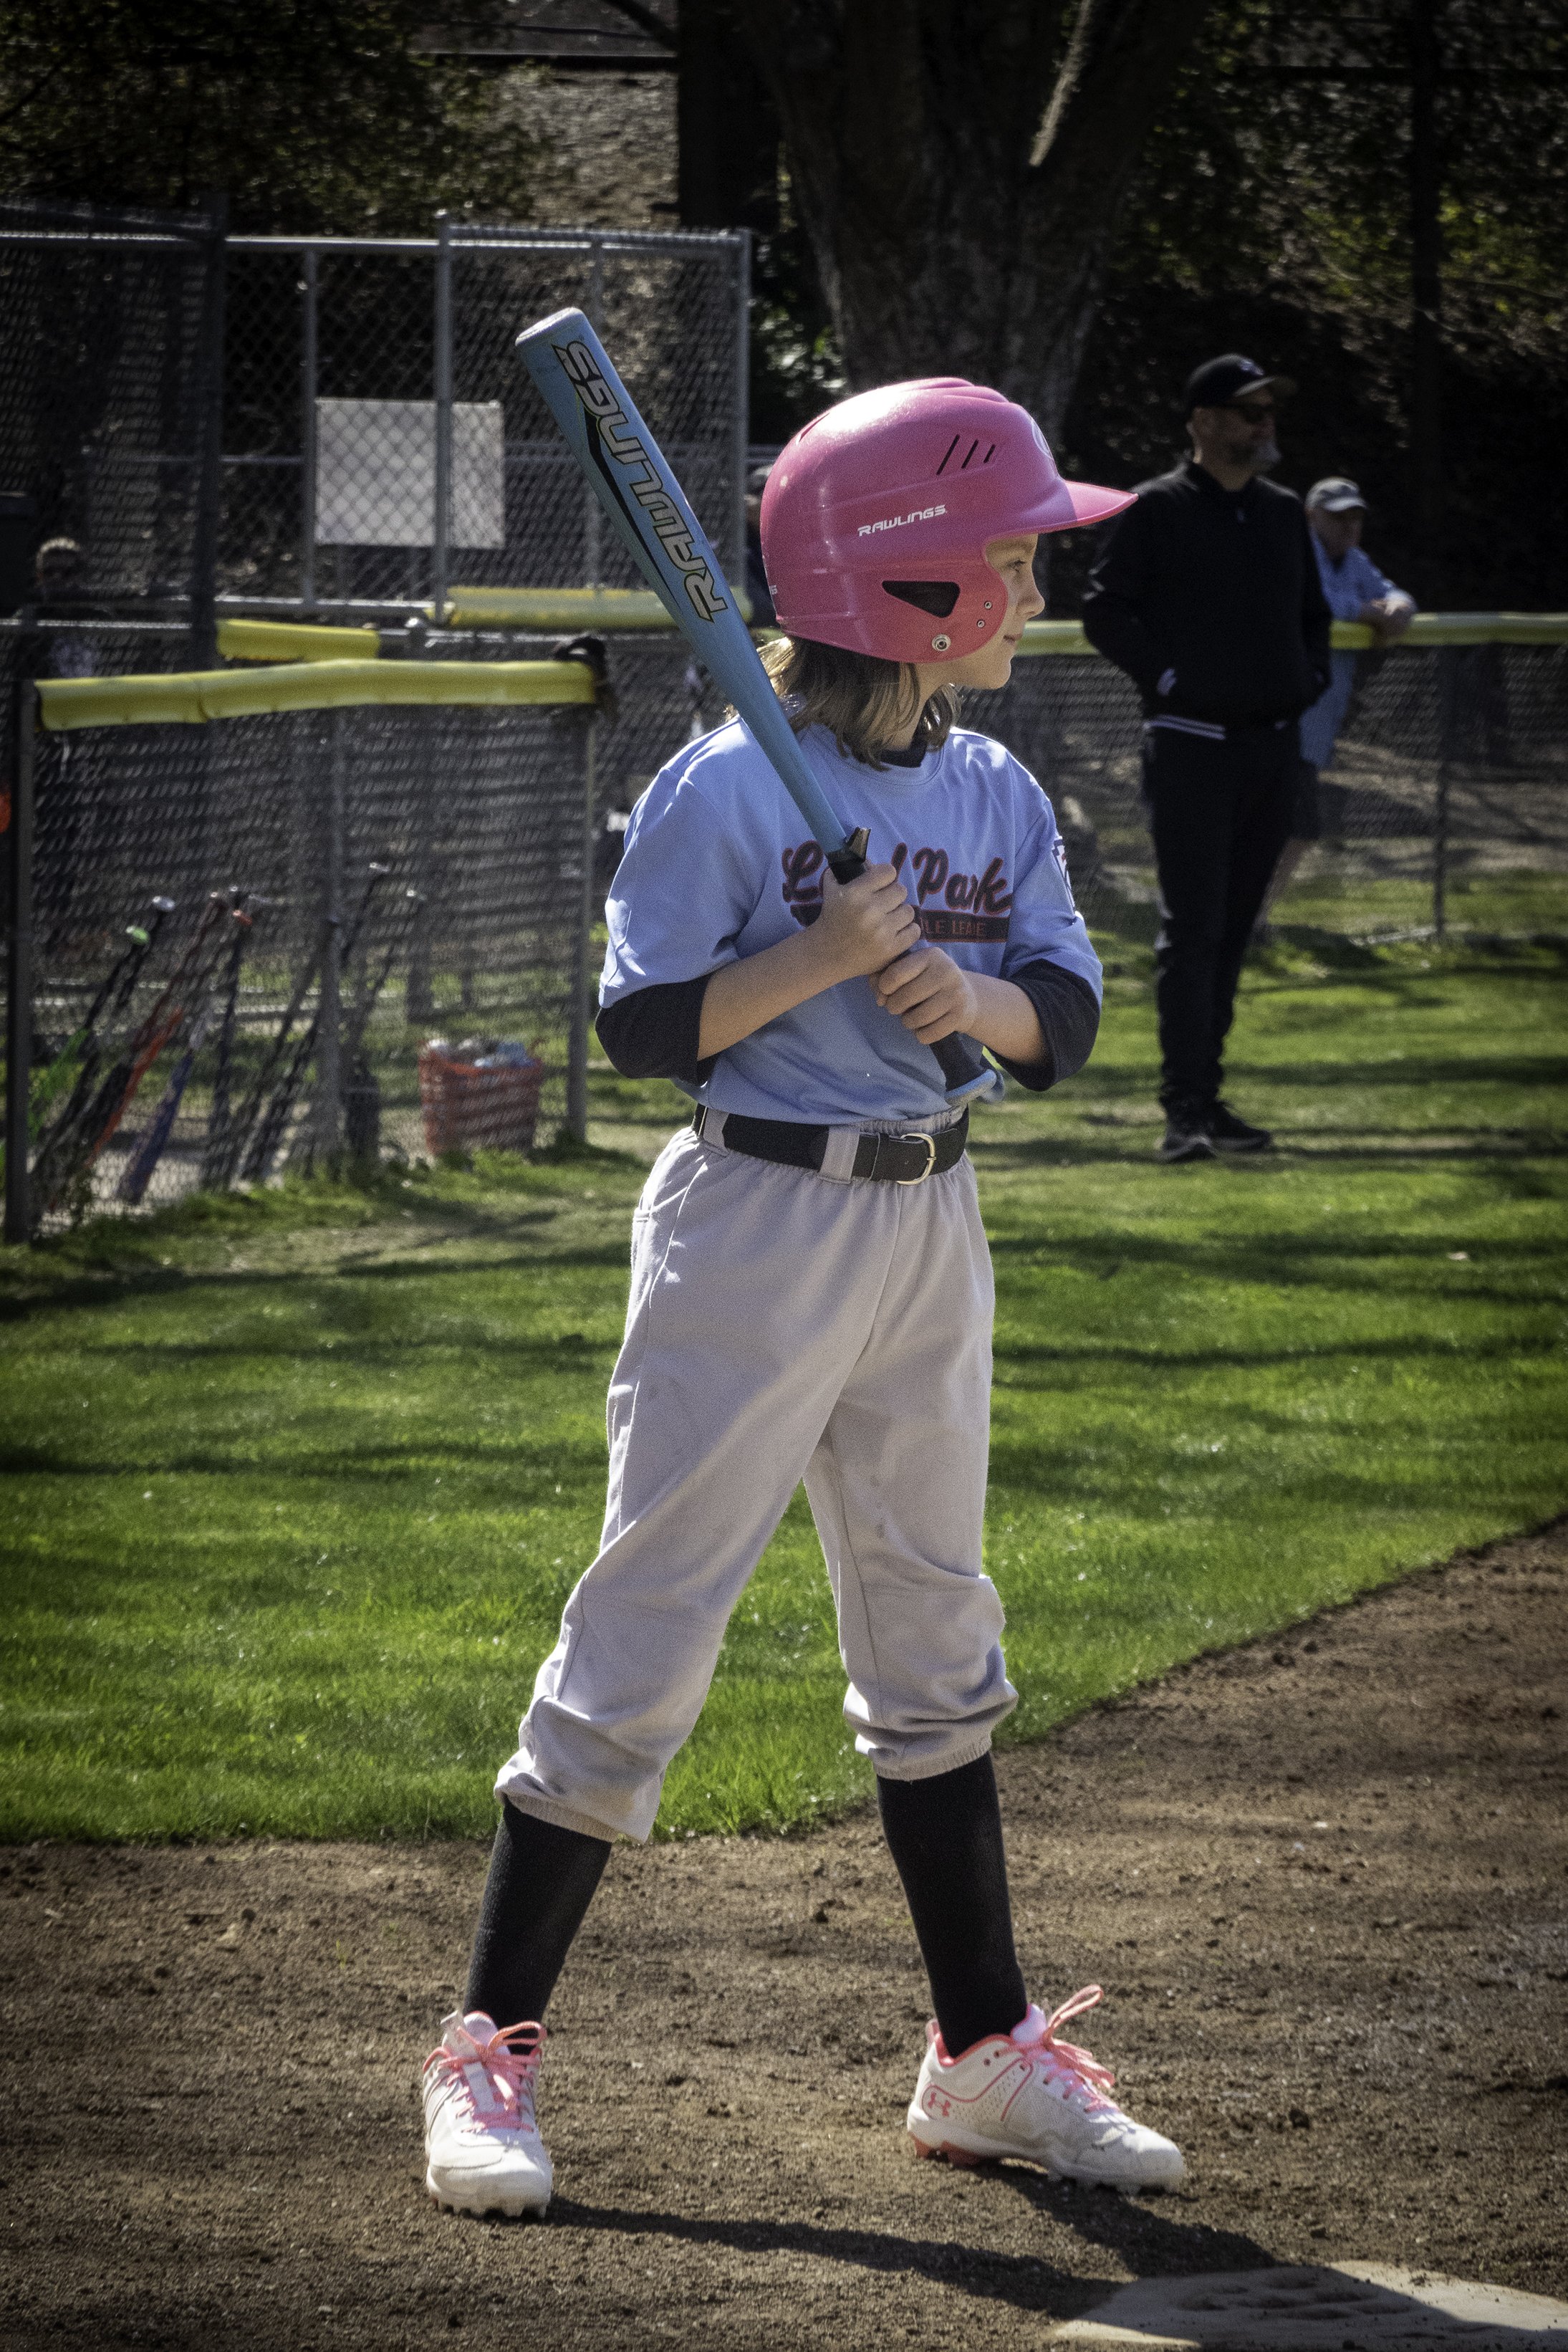 Matching helmet and shoestrings.  Matching bat and jersey.  Matching her teammates by striking out.